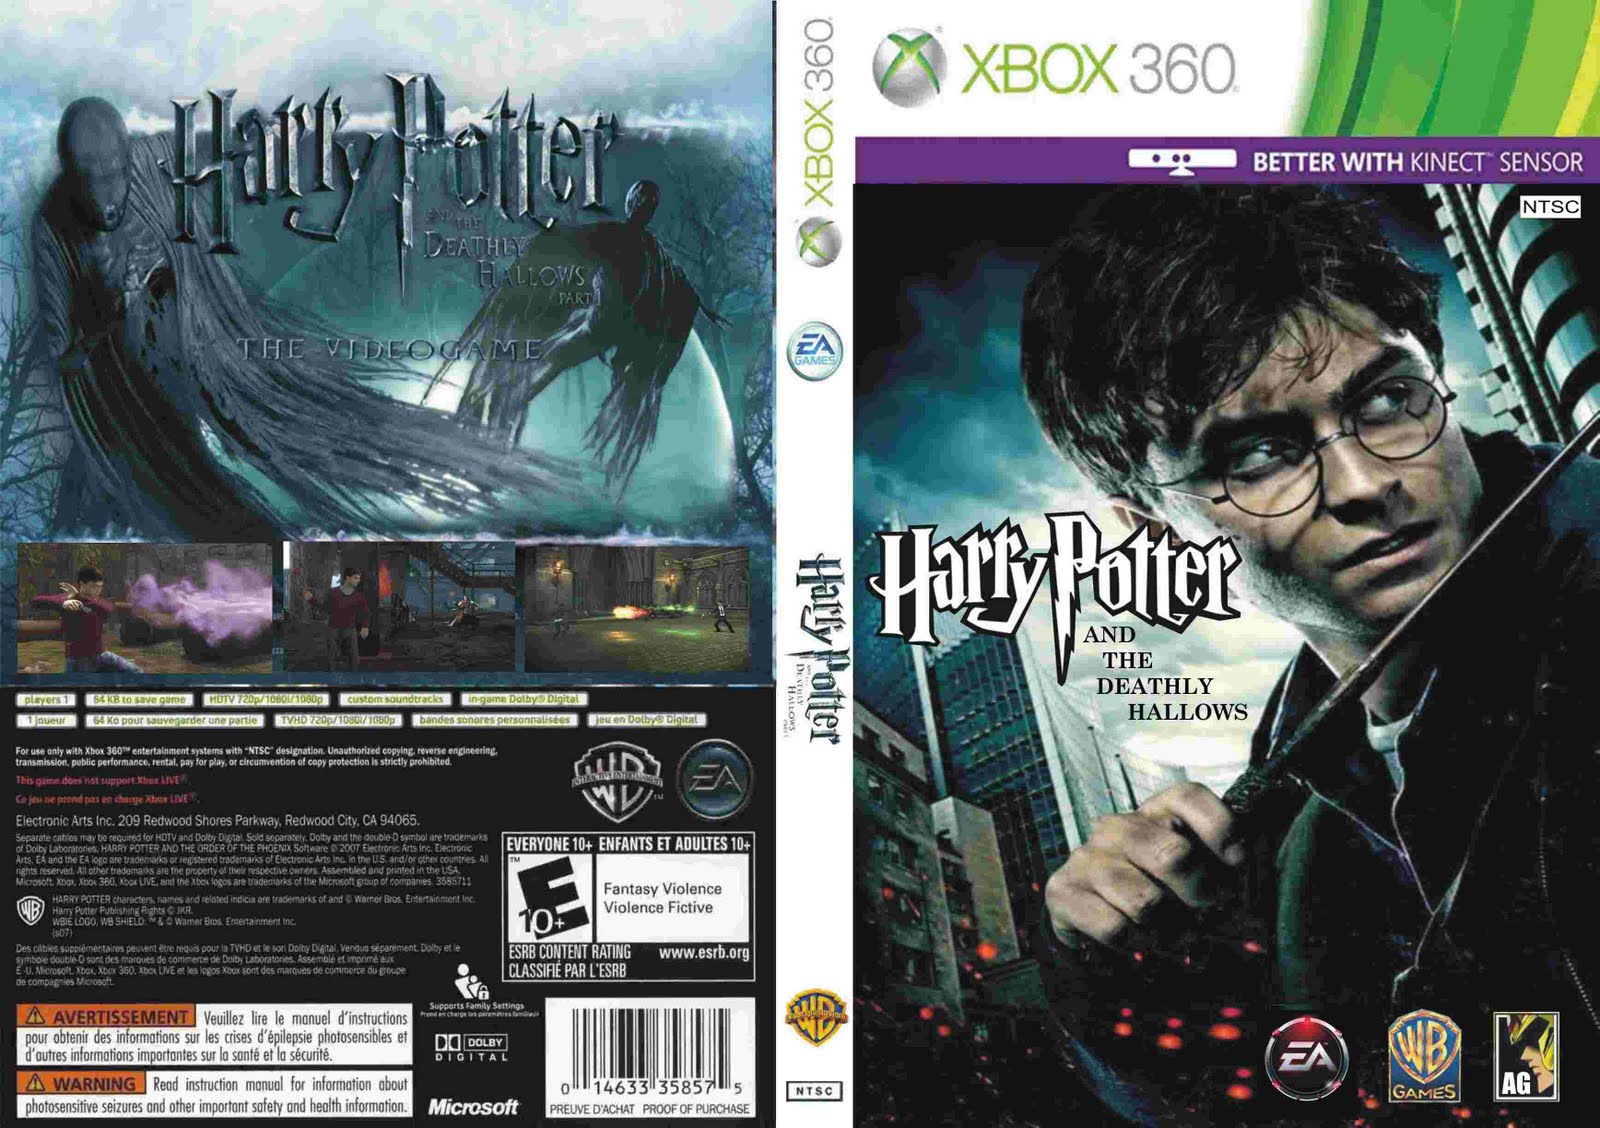 Harry Potter and The Deathly Hallows Part 2 - Xbox 360